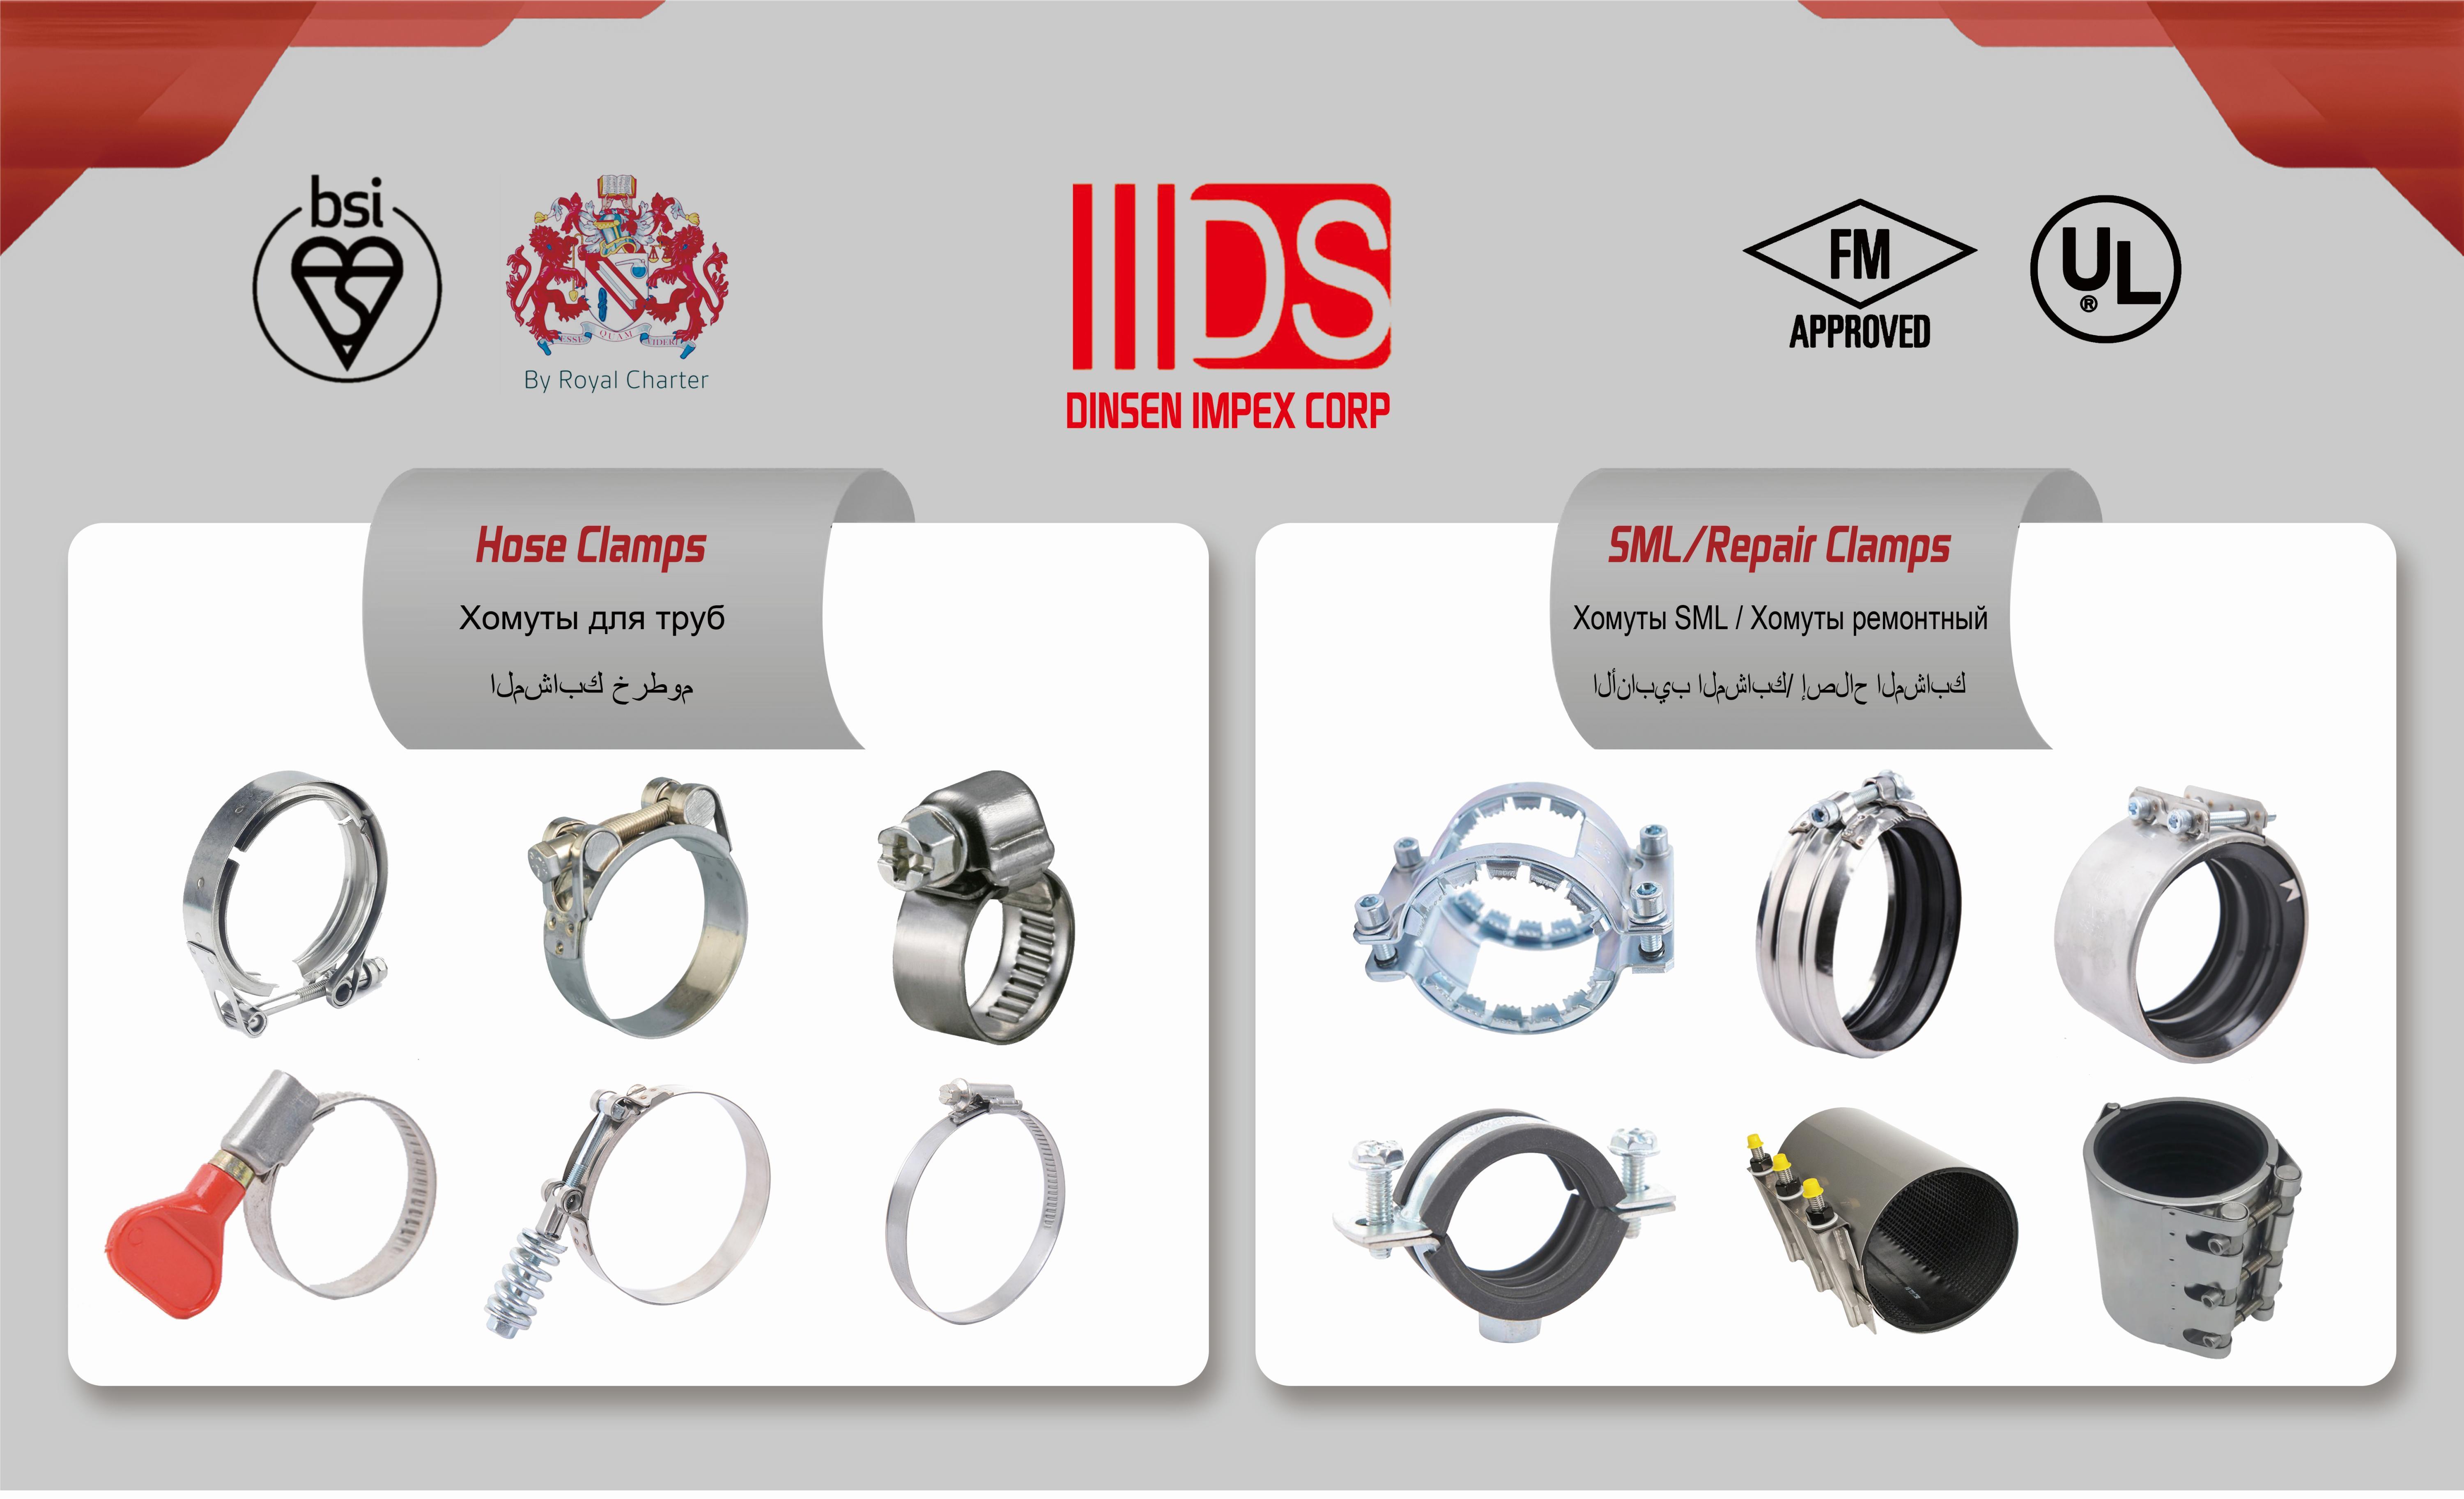 Hose clamps, SML clamps, Repair clamps